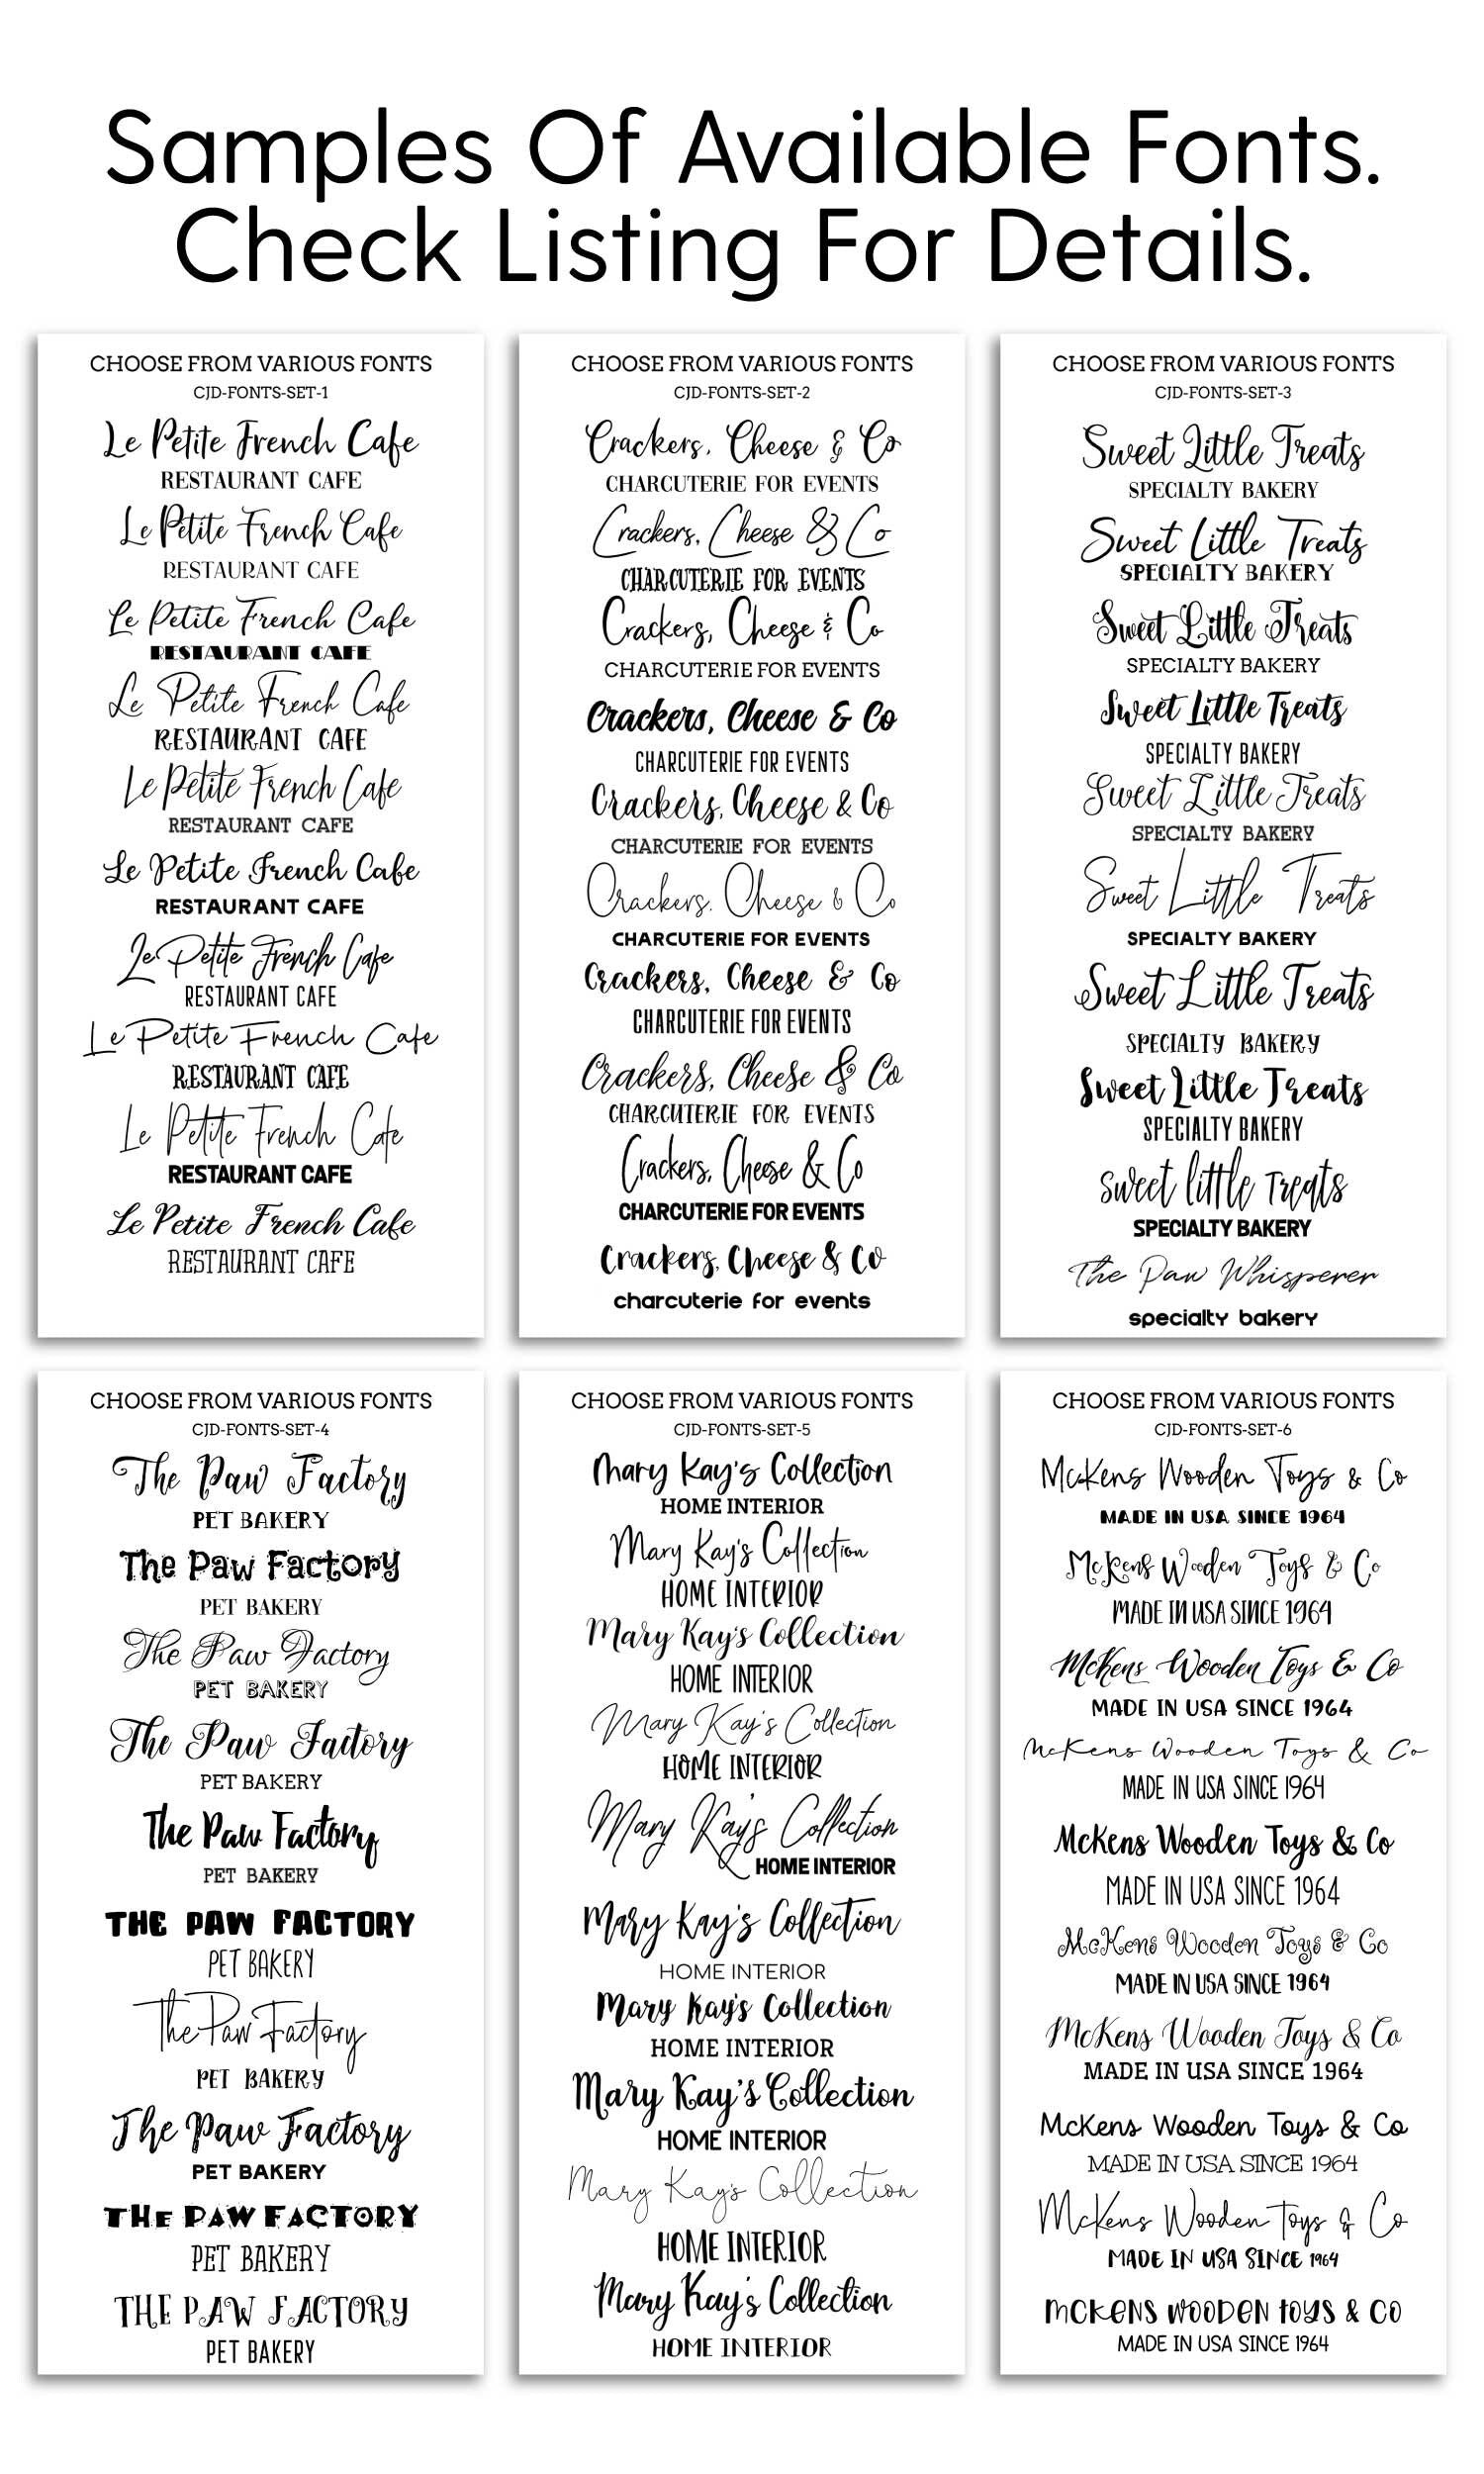 Blank Gift Coupons 3 x 2.5" - Candy Jar Studios